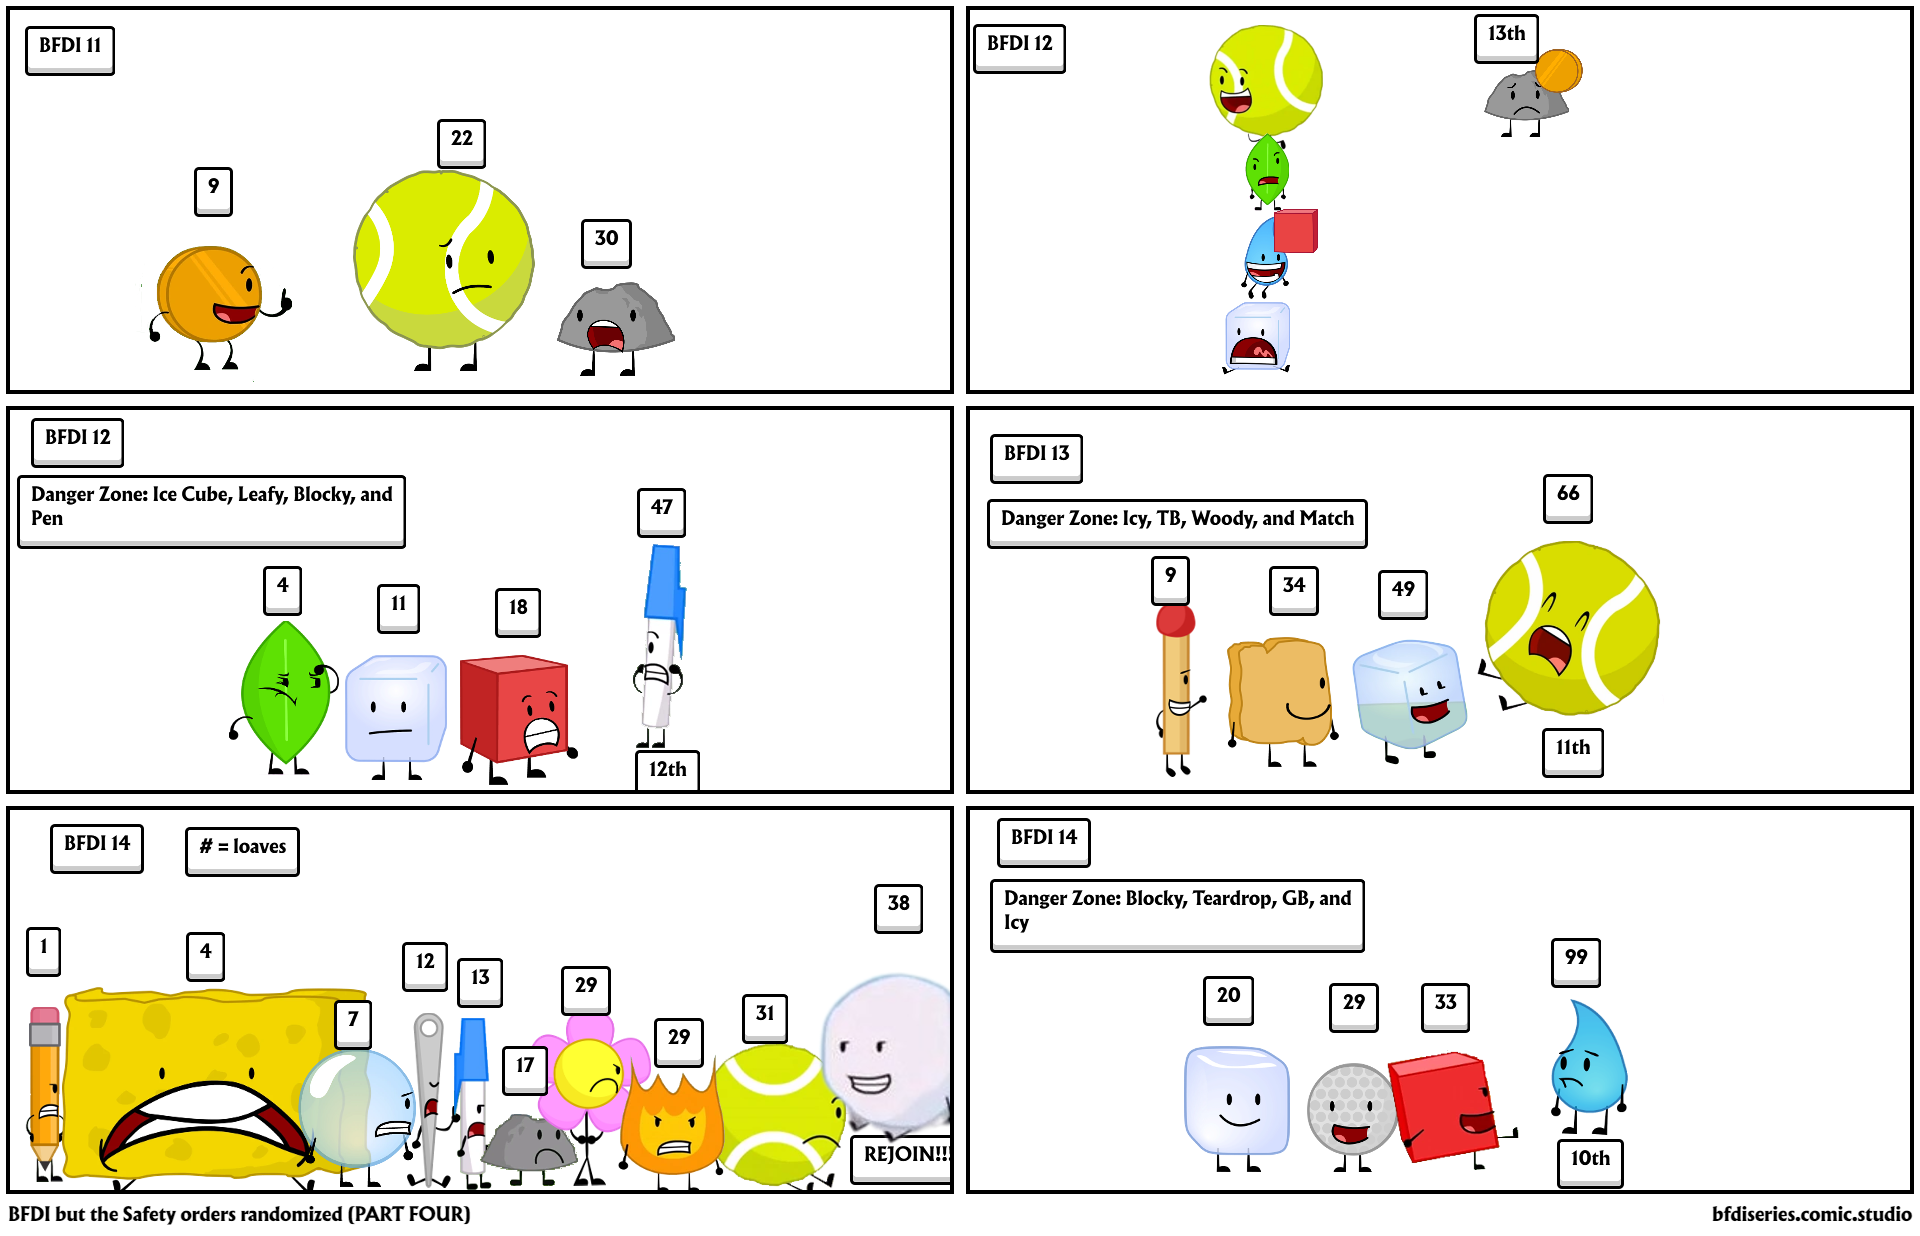 BFDI but the Safety orders randomized (PART FOUR)